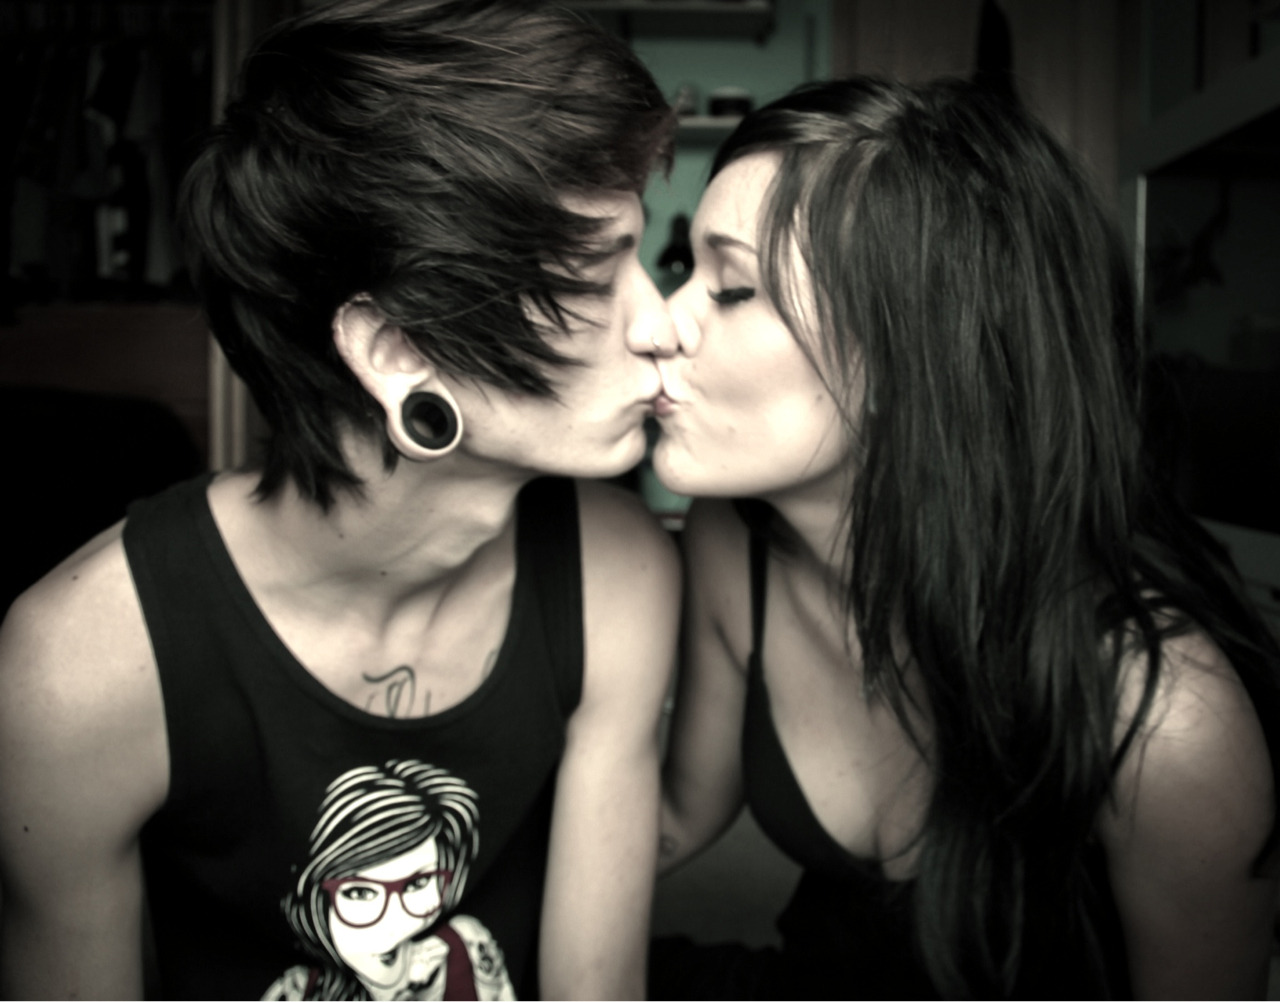 emo-girl-kiss-prettiest-youngest-black-shemales-galleries